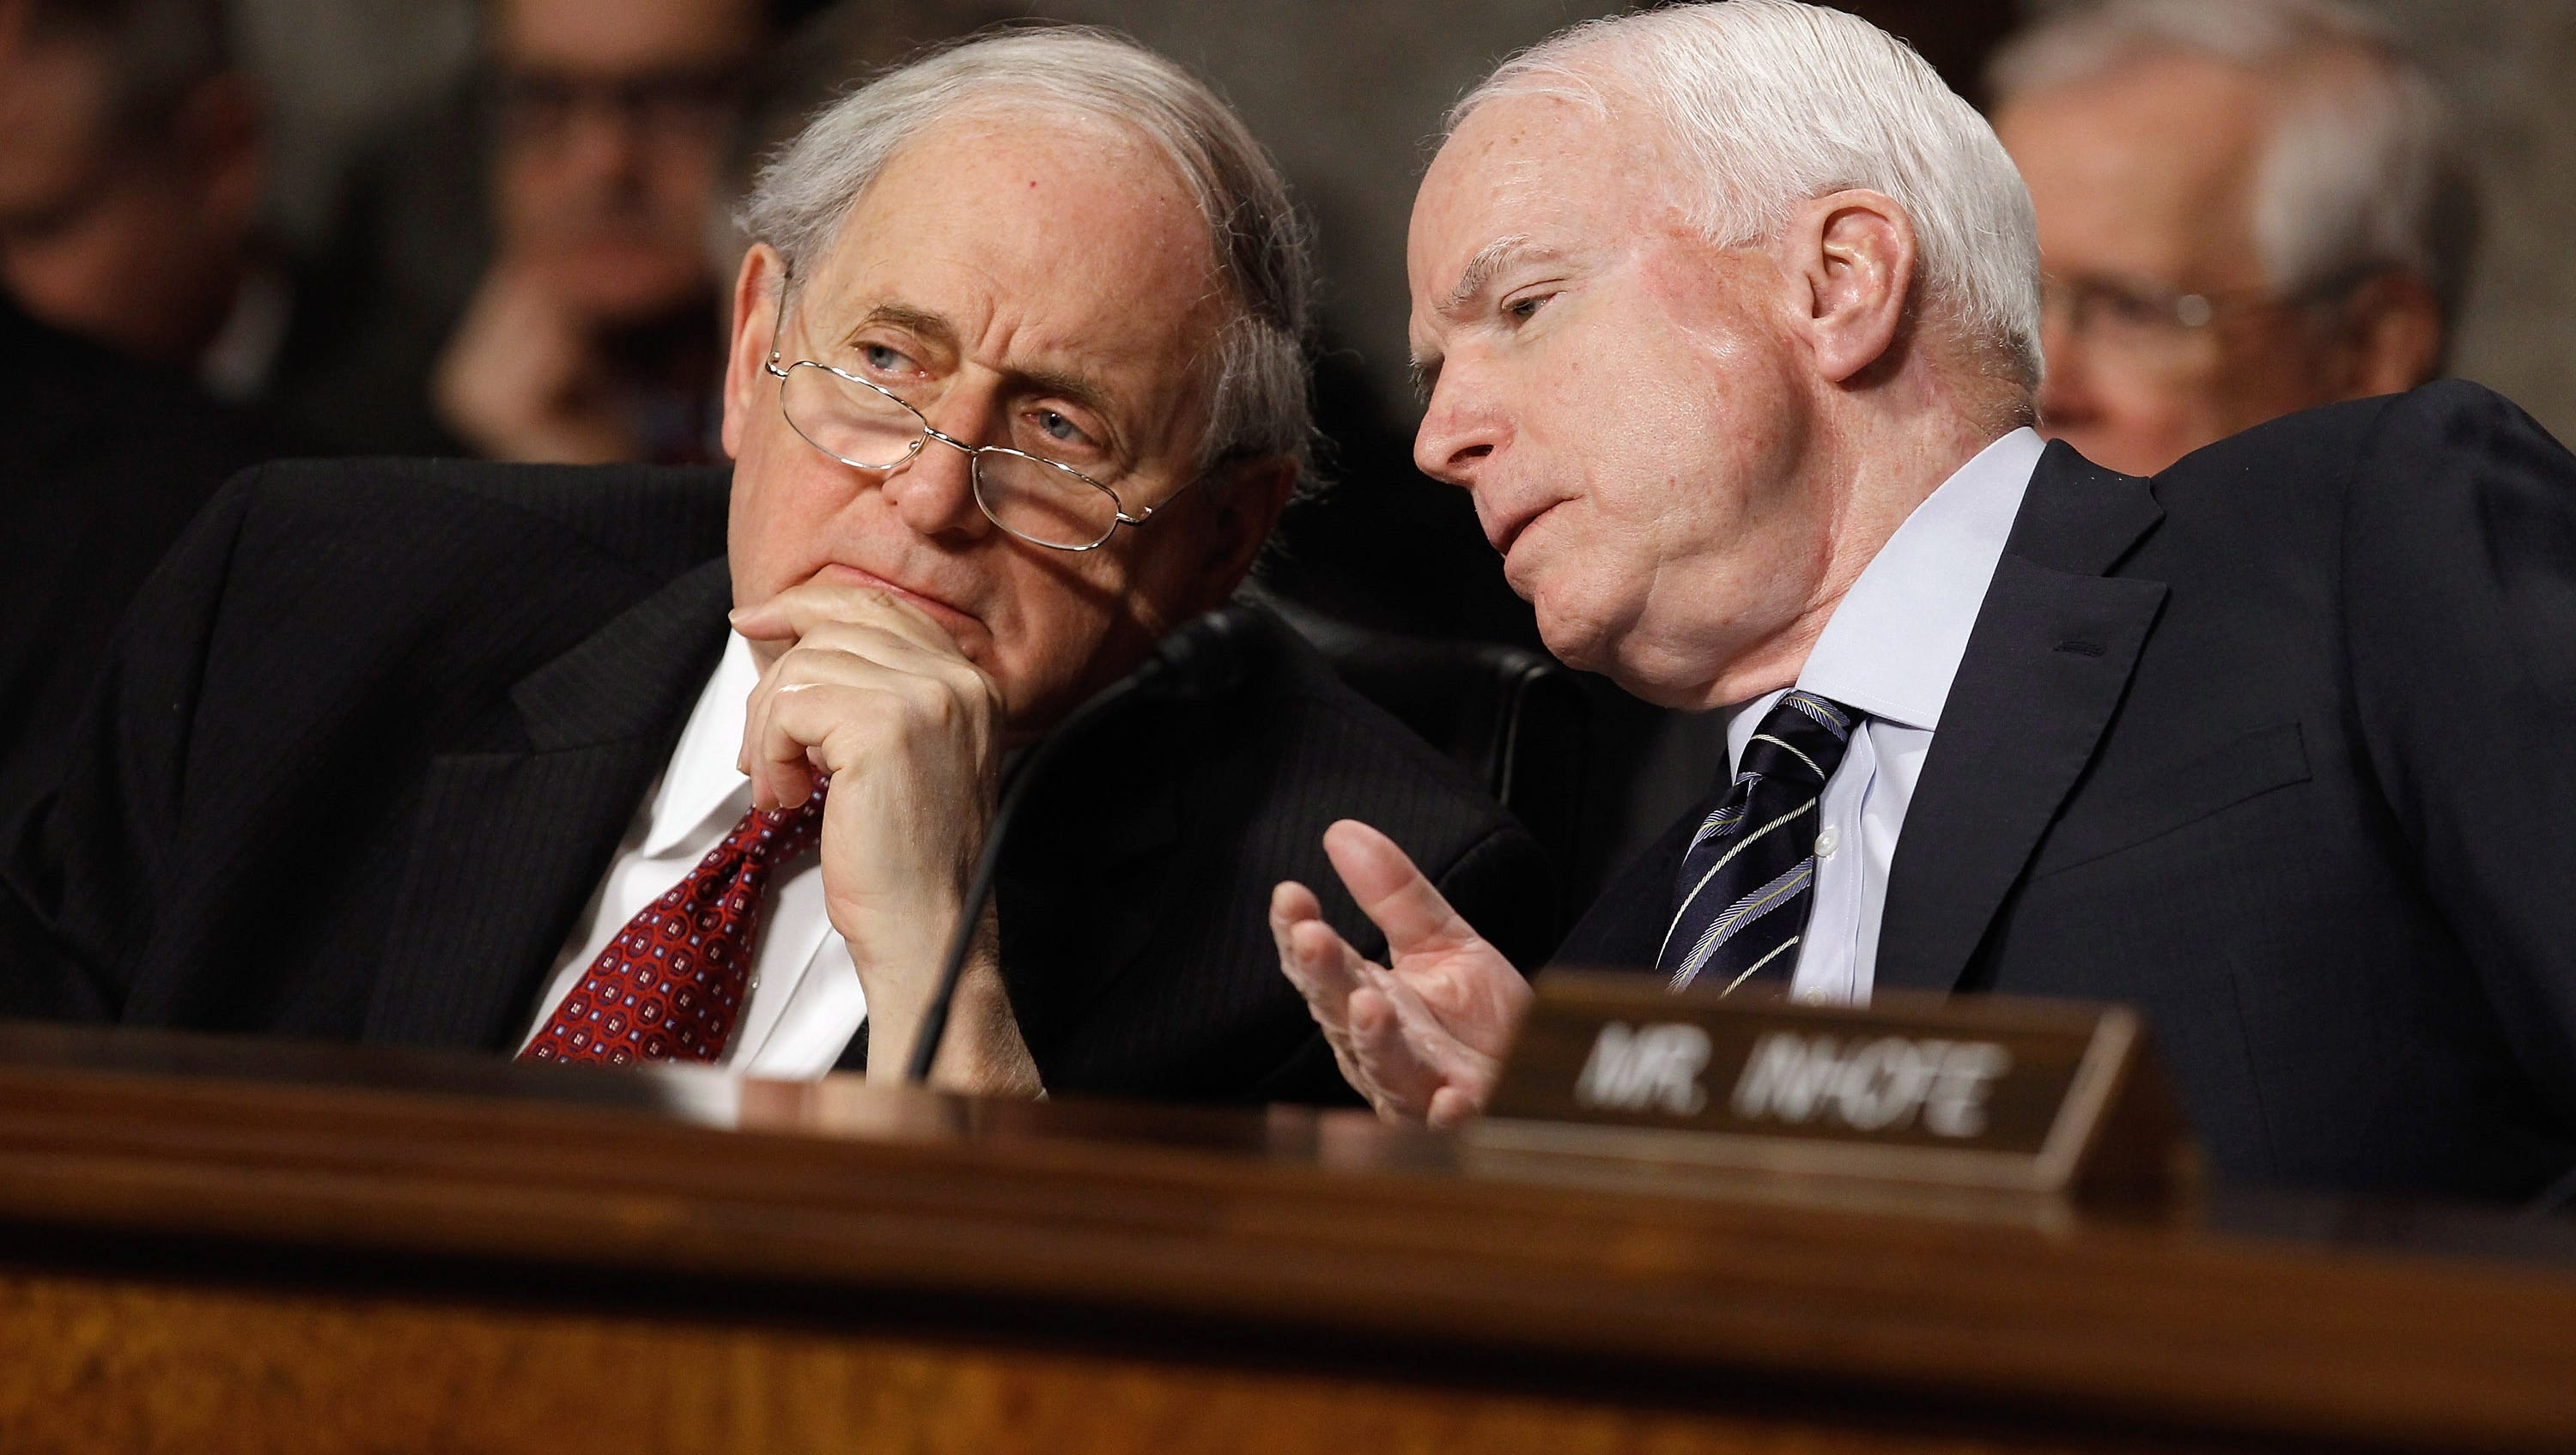 Senate Armed Services Committee Chairman Sen. Carl Levin and ranking member Sen. John McCain, R-Ariz., talk during a hearing about worldwide threats to the security of the United States on Capitol Hill Feb. 16, 2012. He has “made a major contribution to the nation’s security,” said McCain, who disagreed with Levin on many issues but still forged an amiable working relationship.